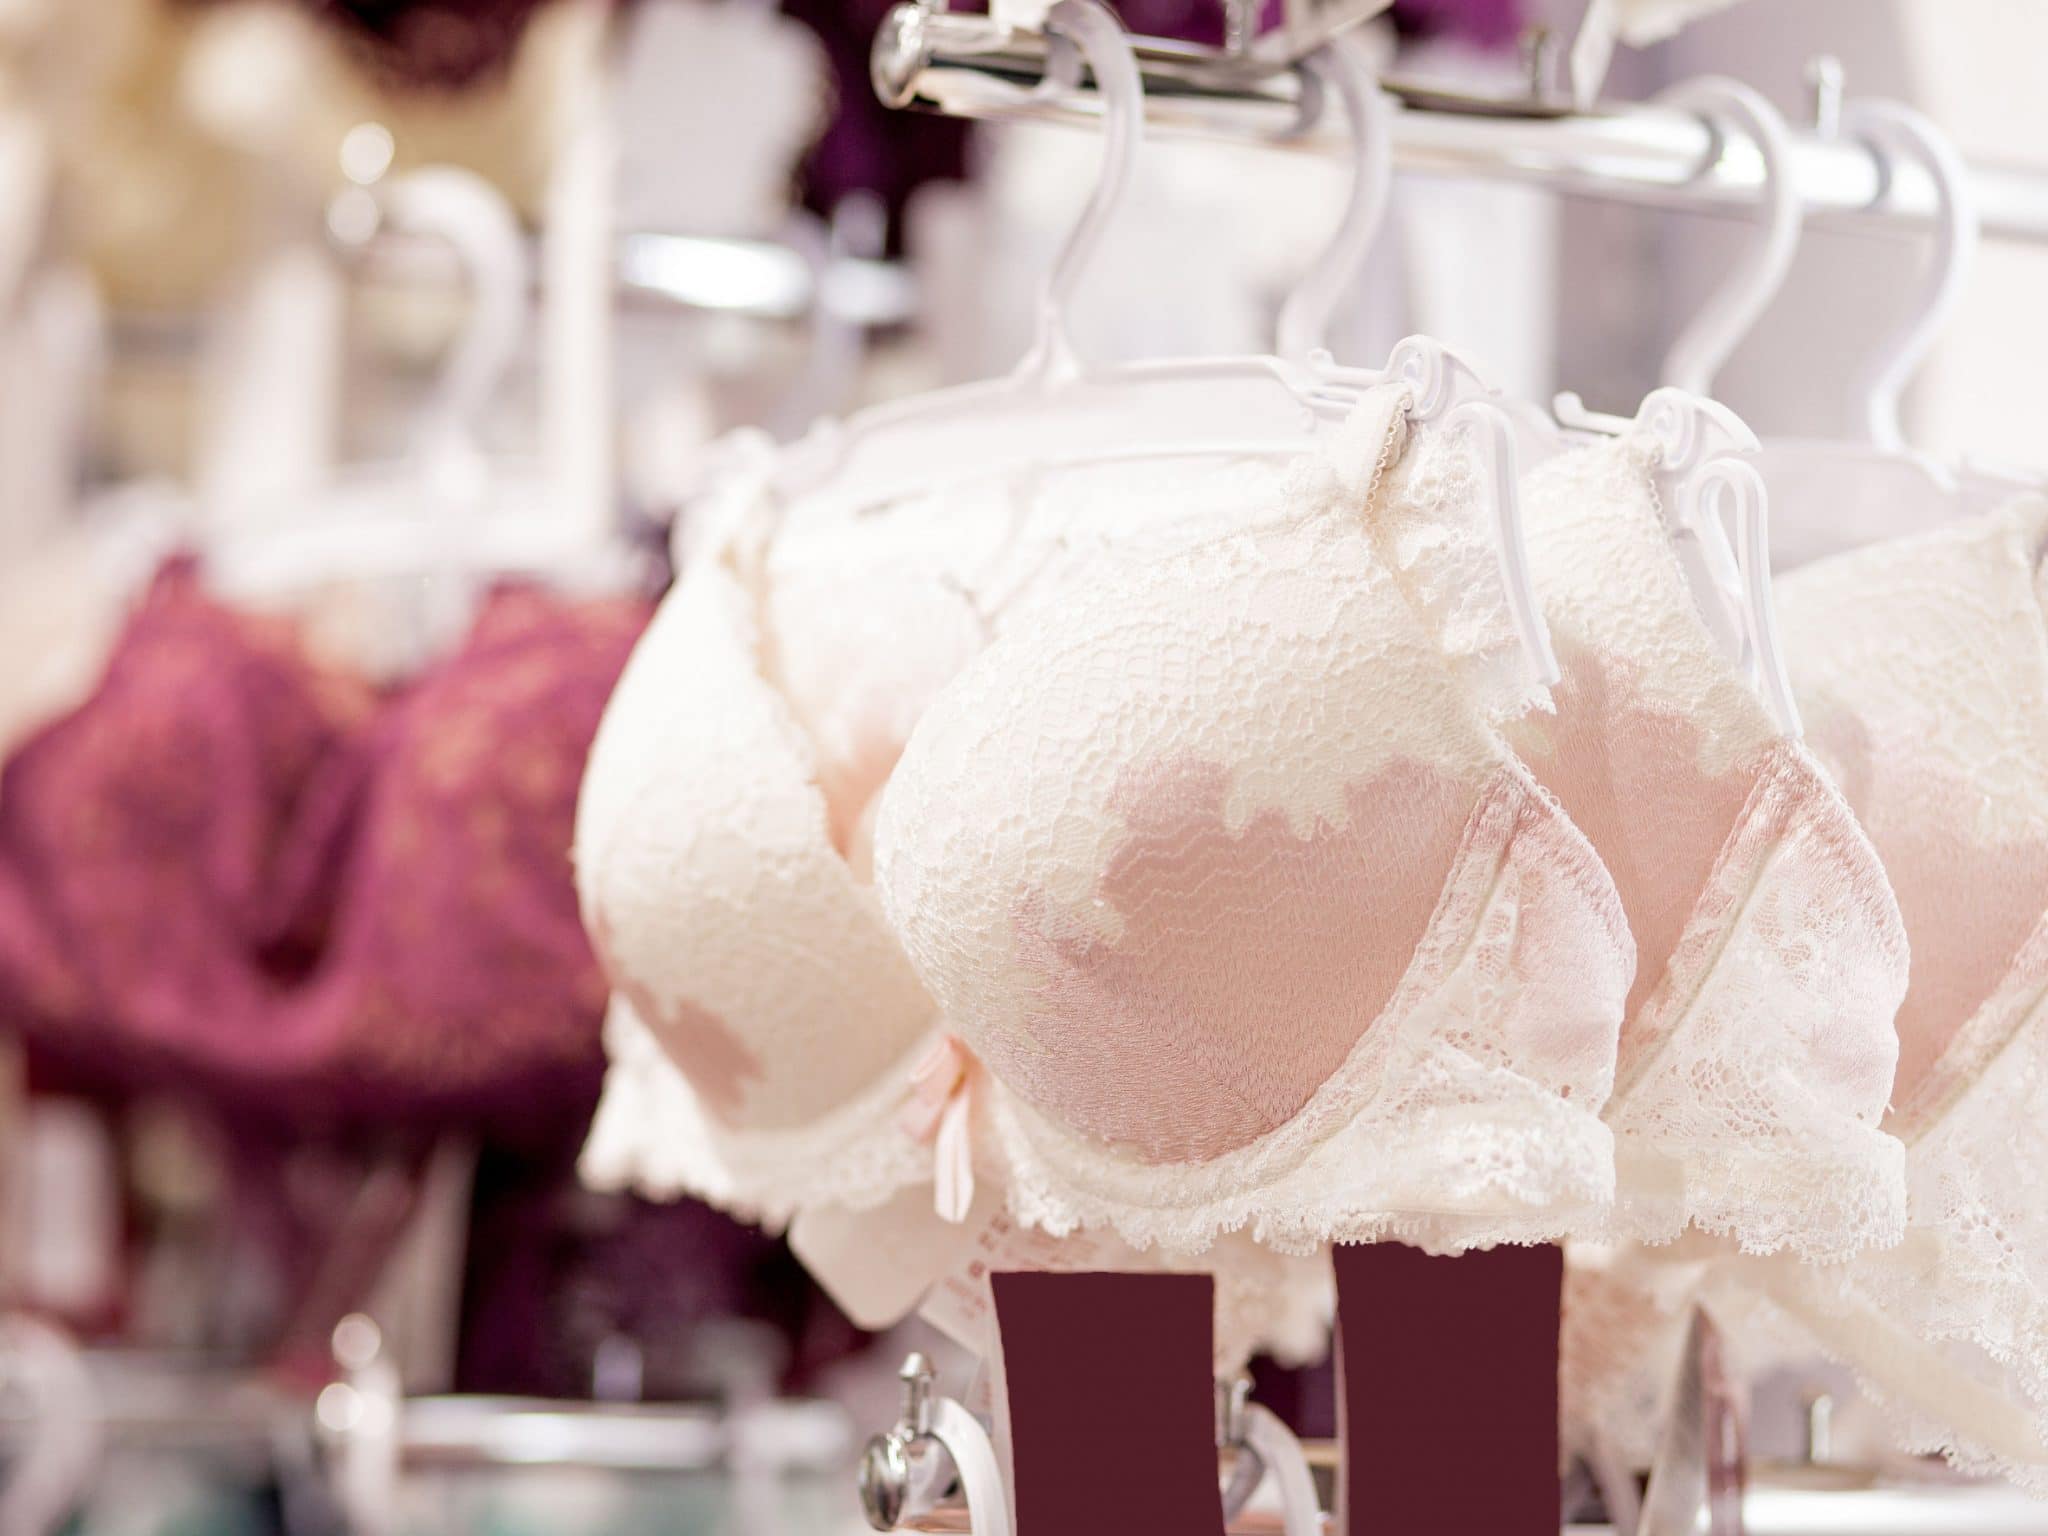 How do you attach shapewear to a bra?